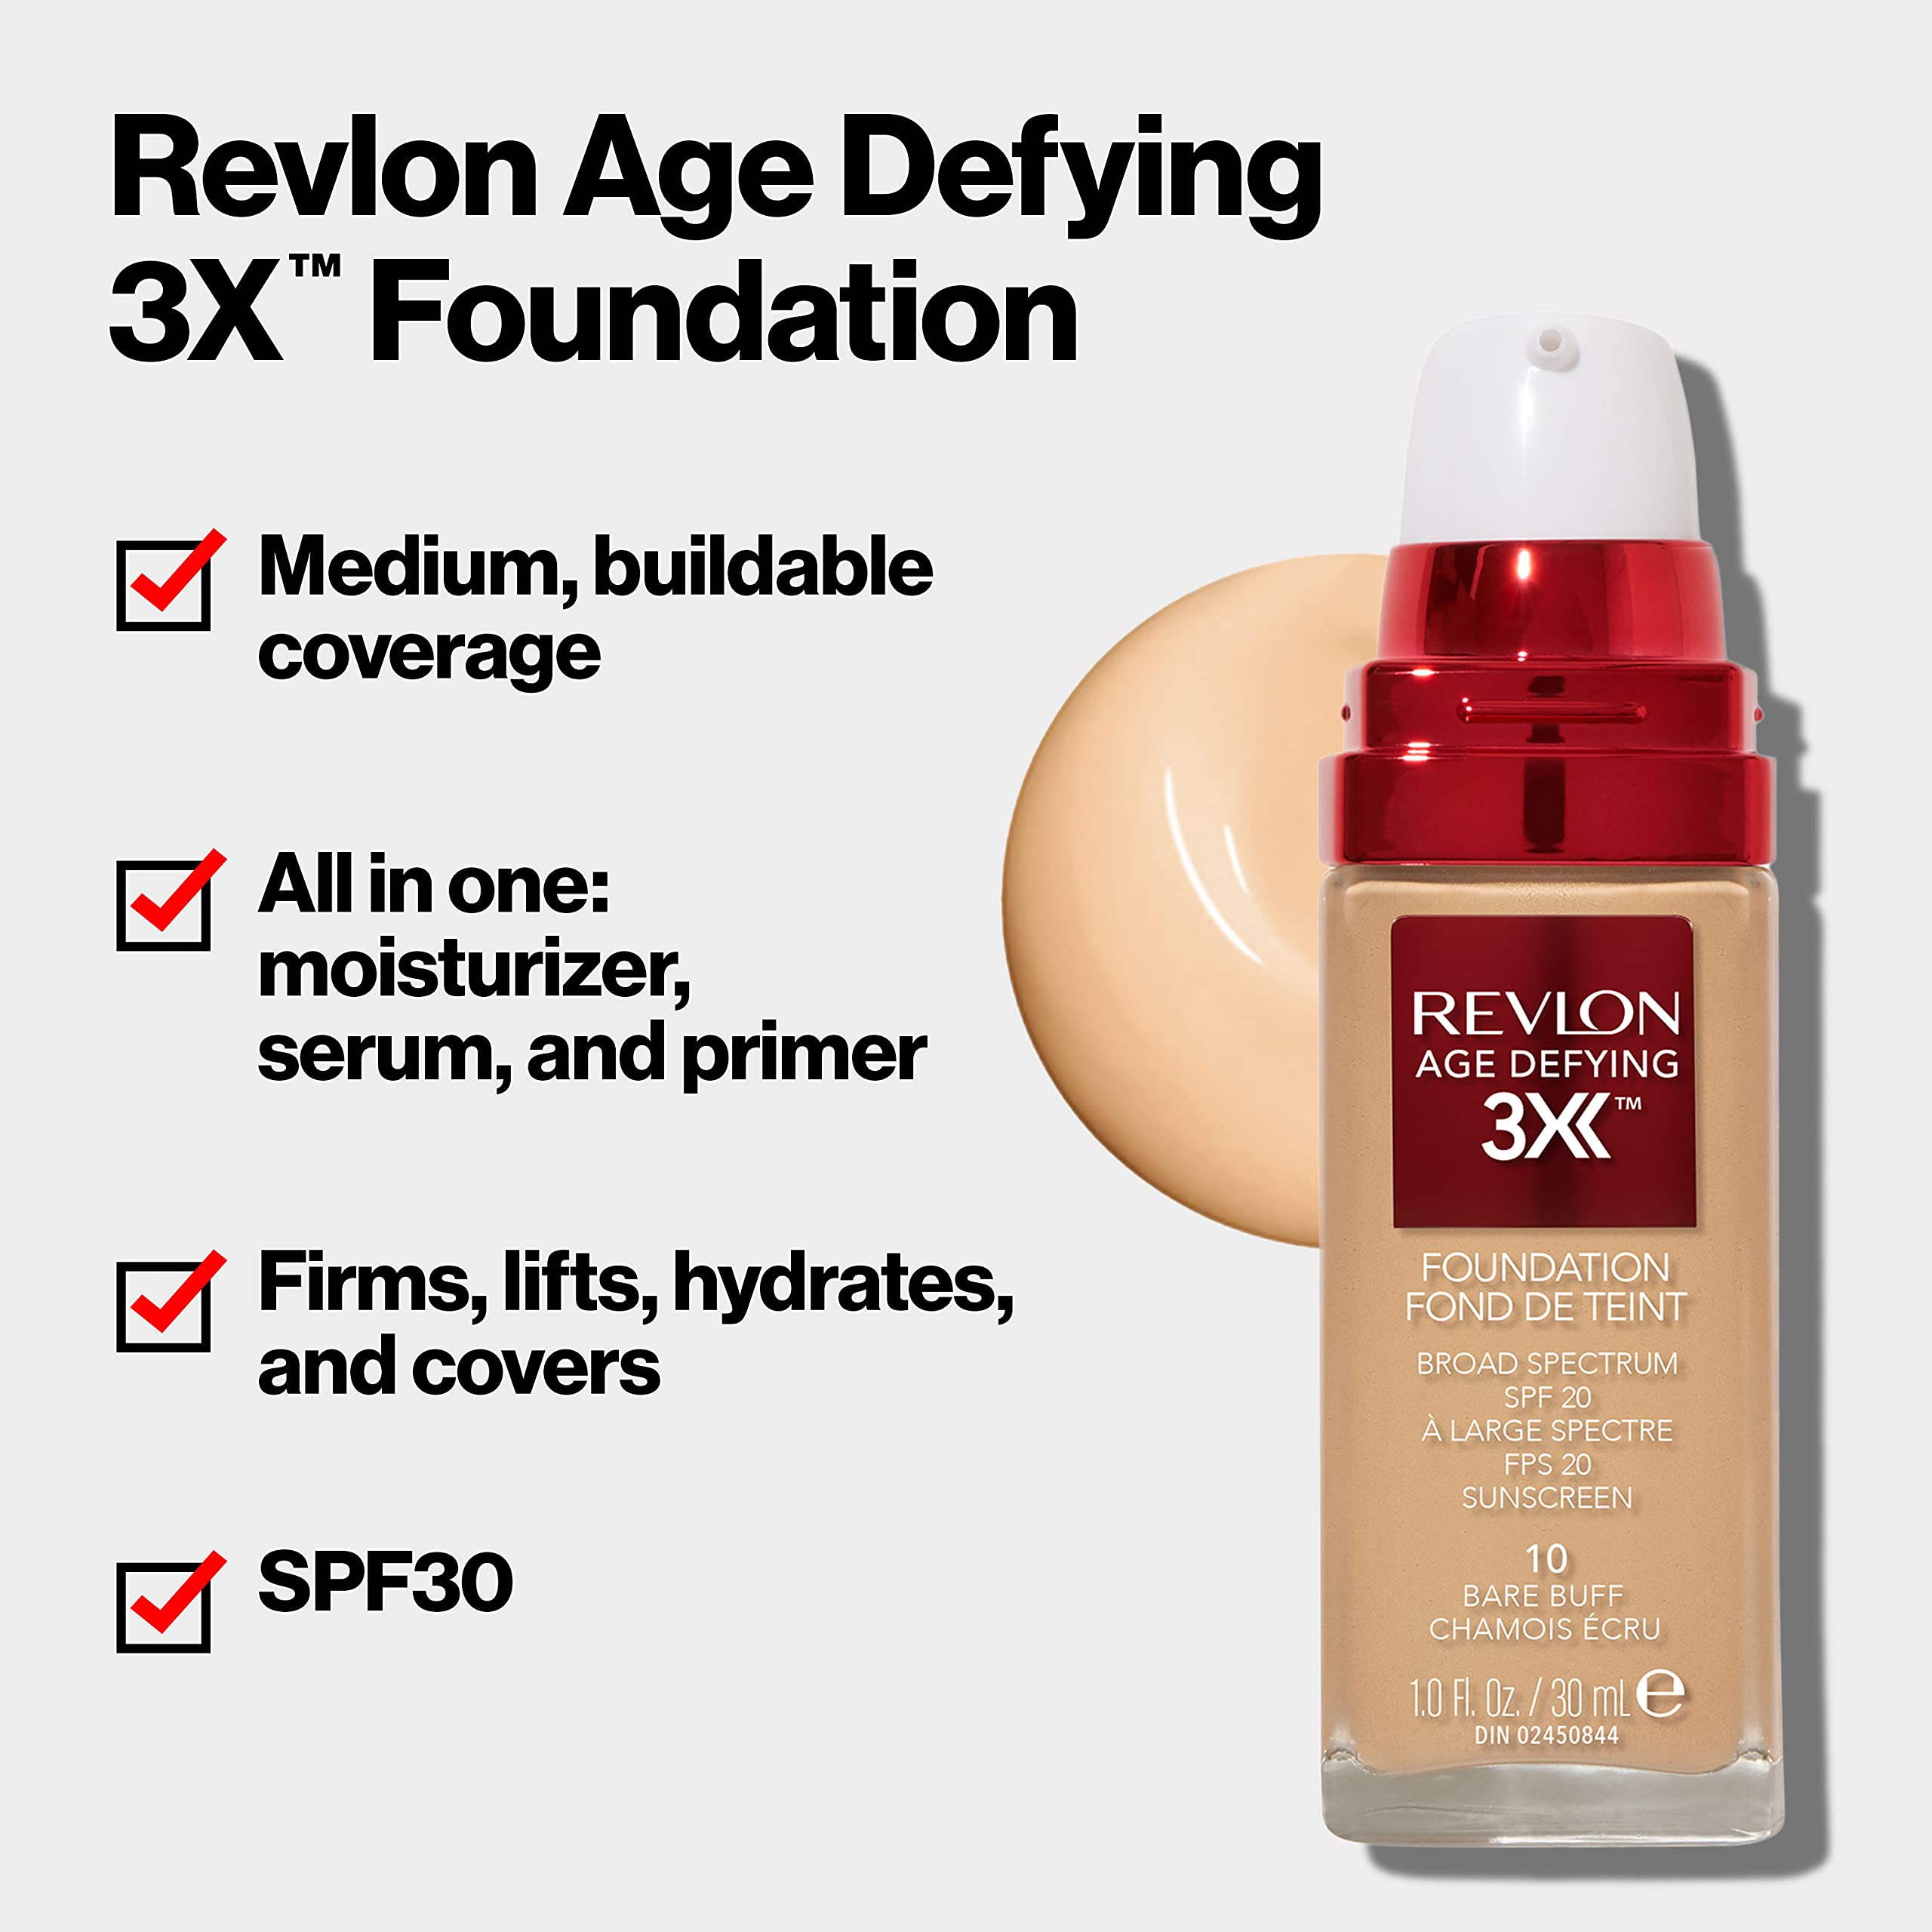 Revlon Liquid Foundation, Age Defying 3XFace Makeup, Anti-Aging and Firming Formula, SPF 30, Longwear Medium Buildable Coverage with Natural Finish, 005 Fresh Ivory, 1 Fl Oz